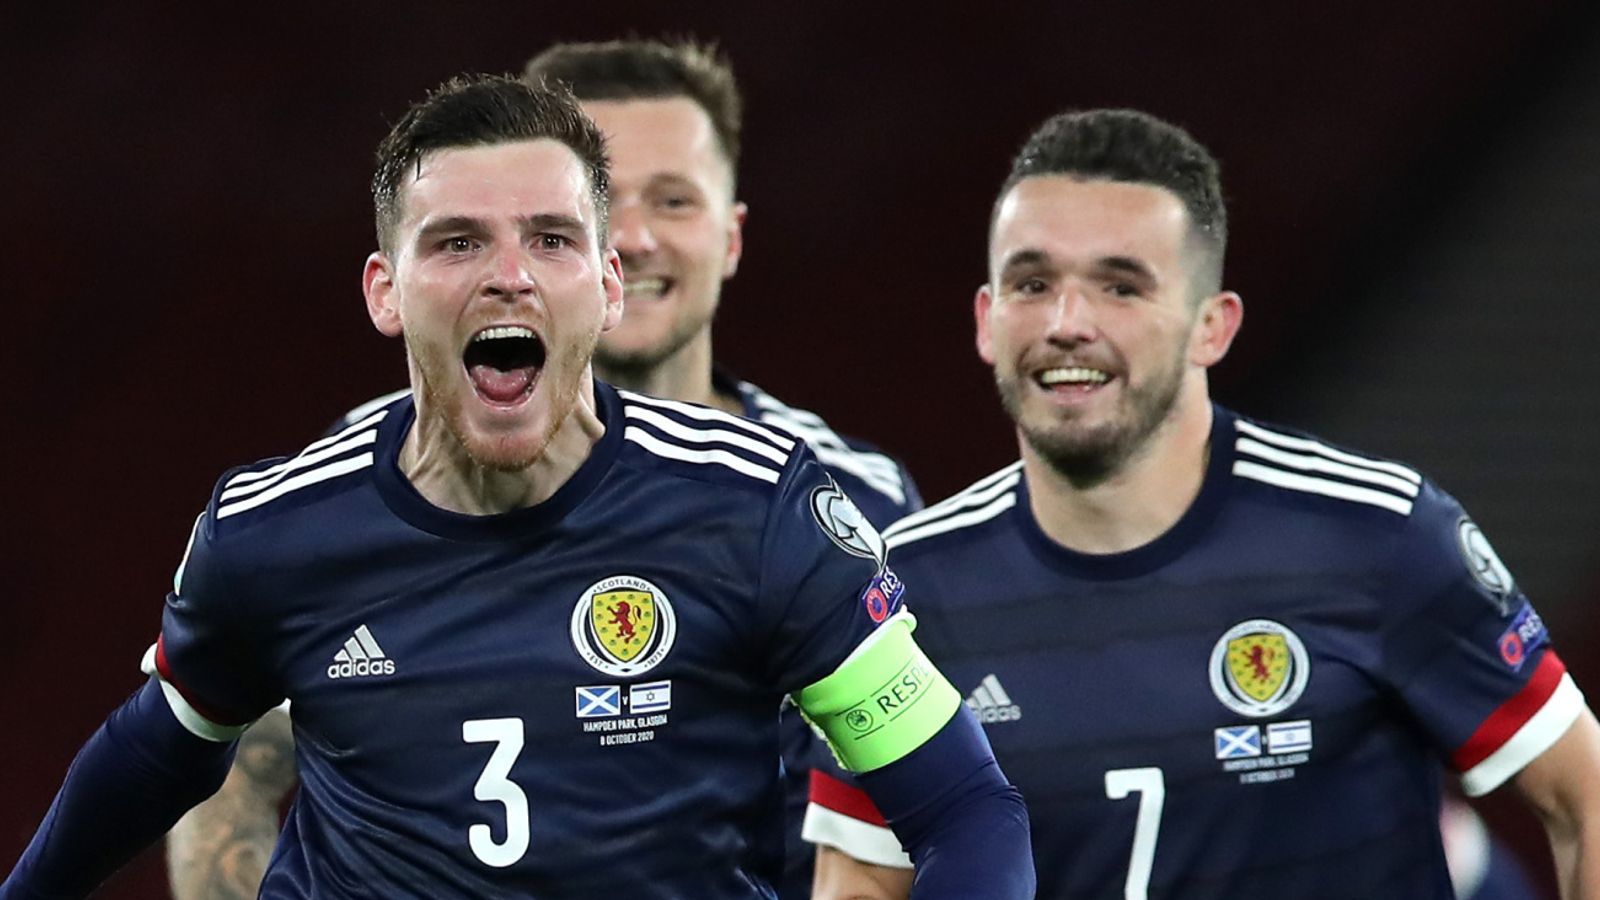 Scotland's Euro 2020 fixtures, dates and potential route for 2021